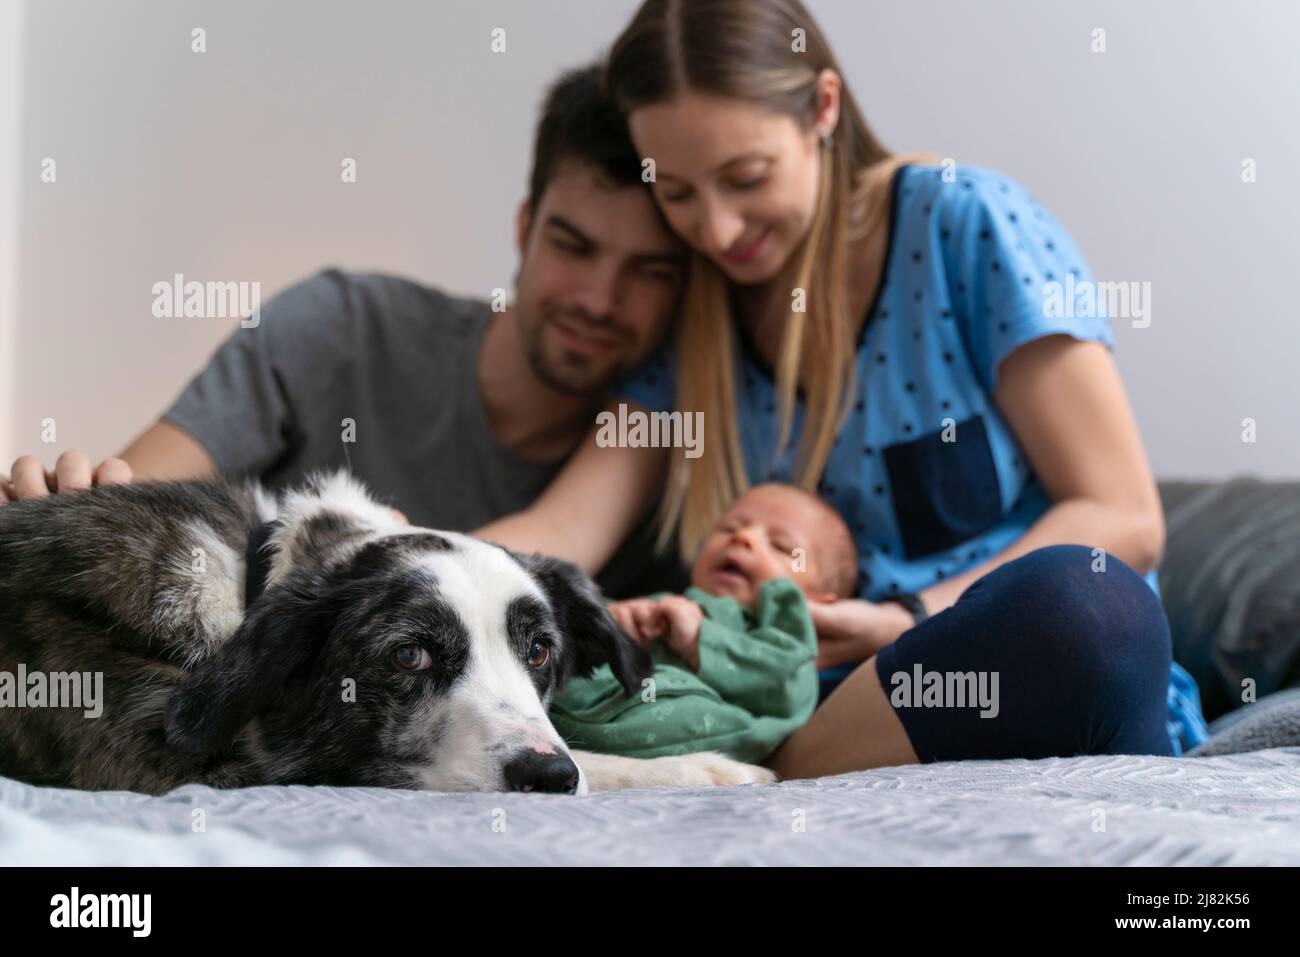 The dog of the family meets the newborn baby in the bedroom at home Stock Photo